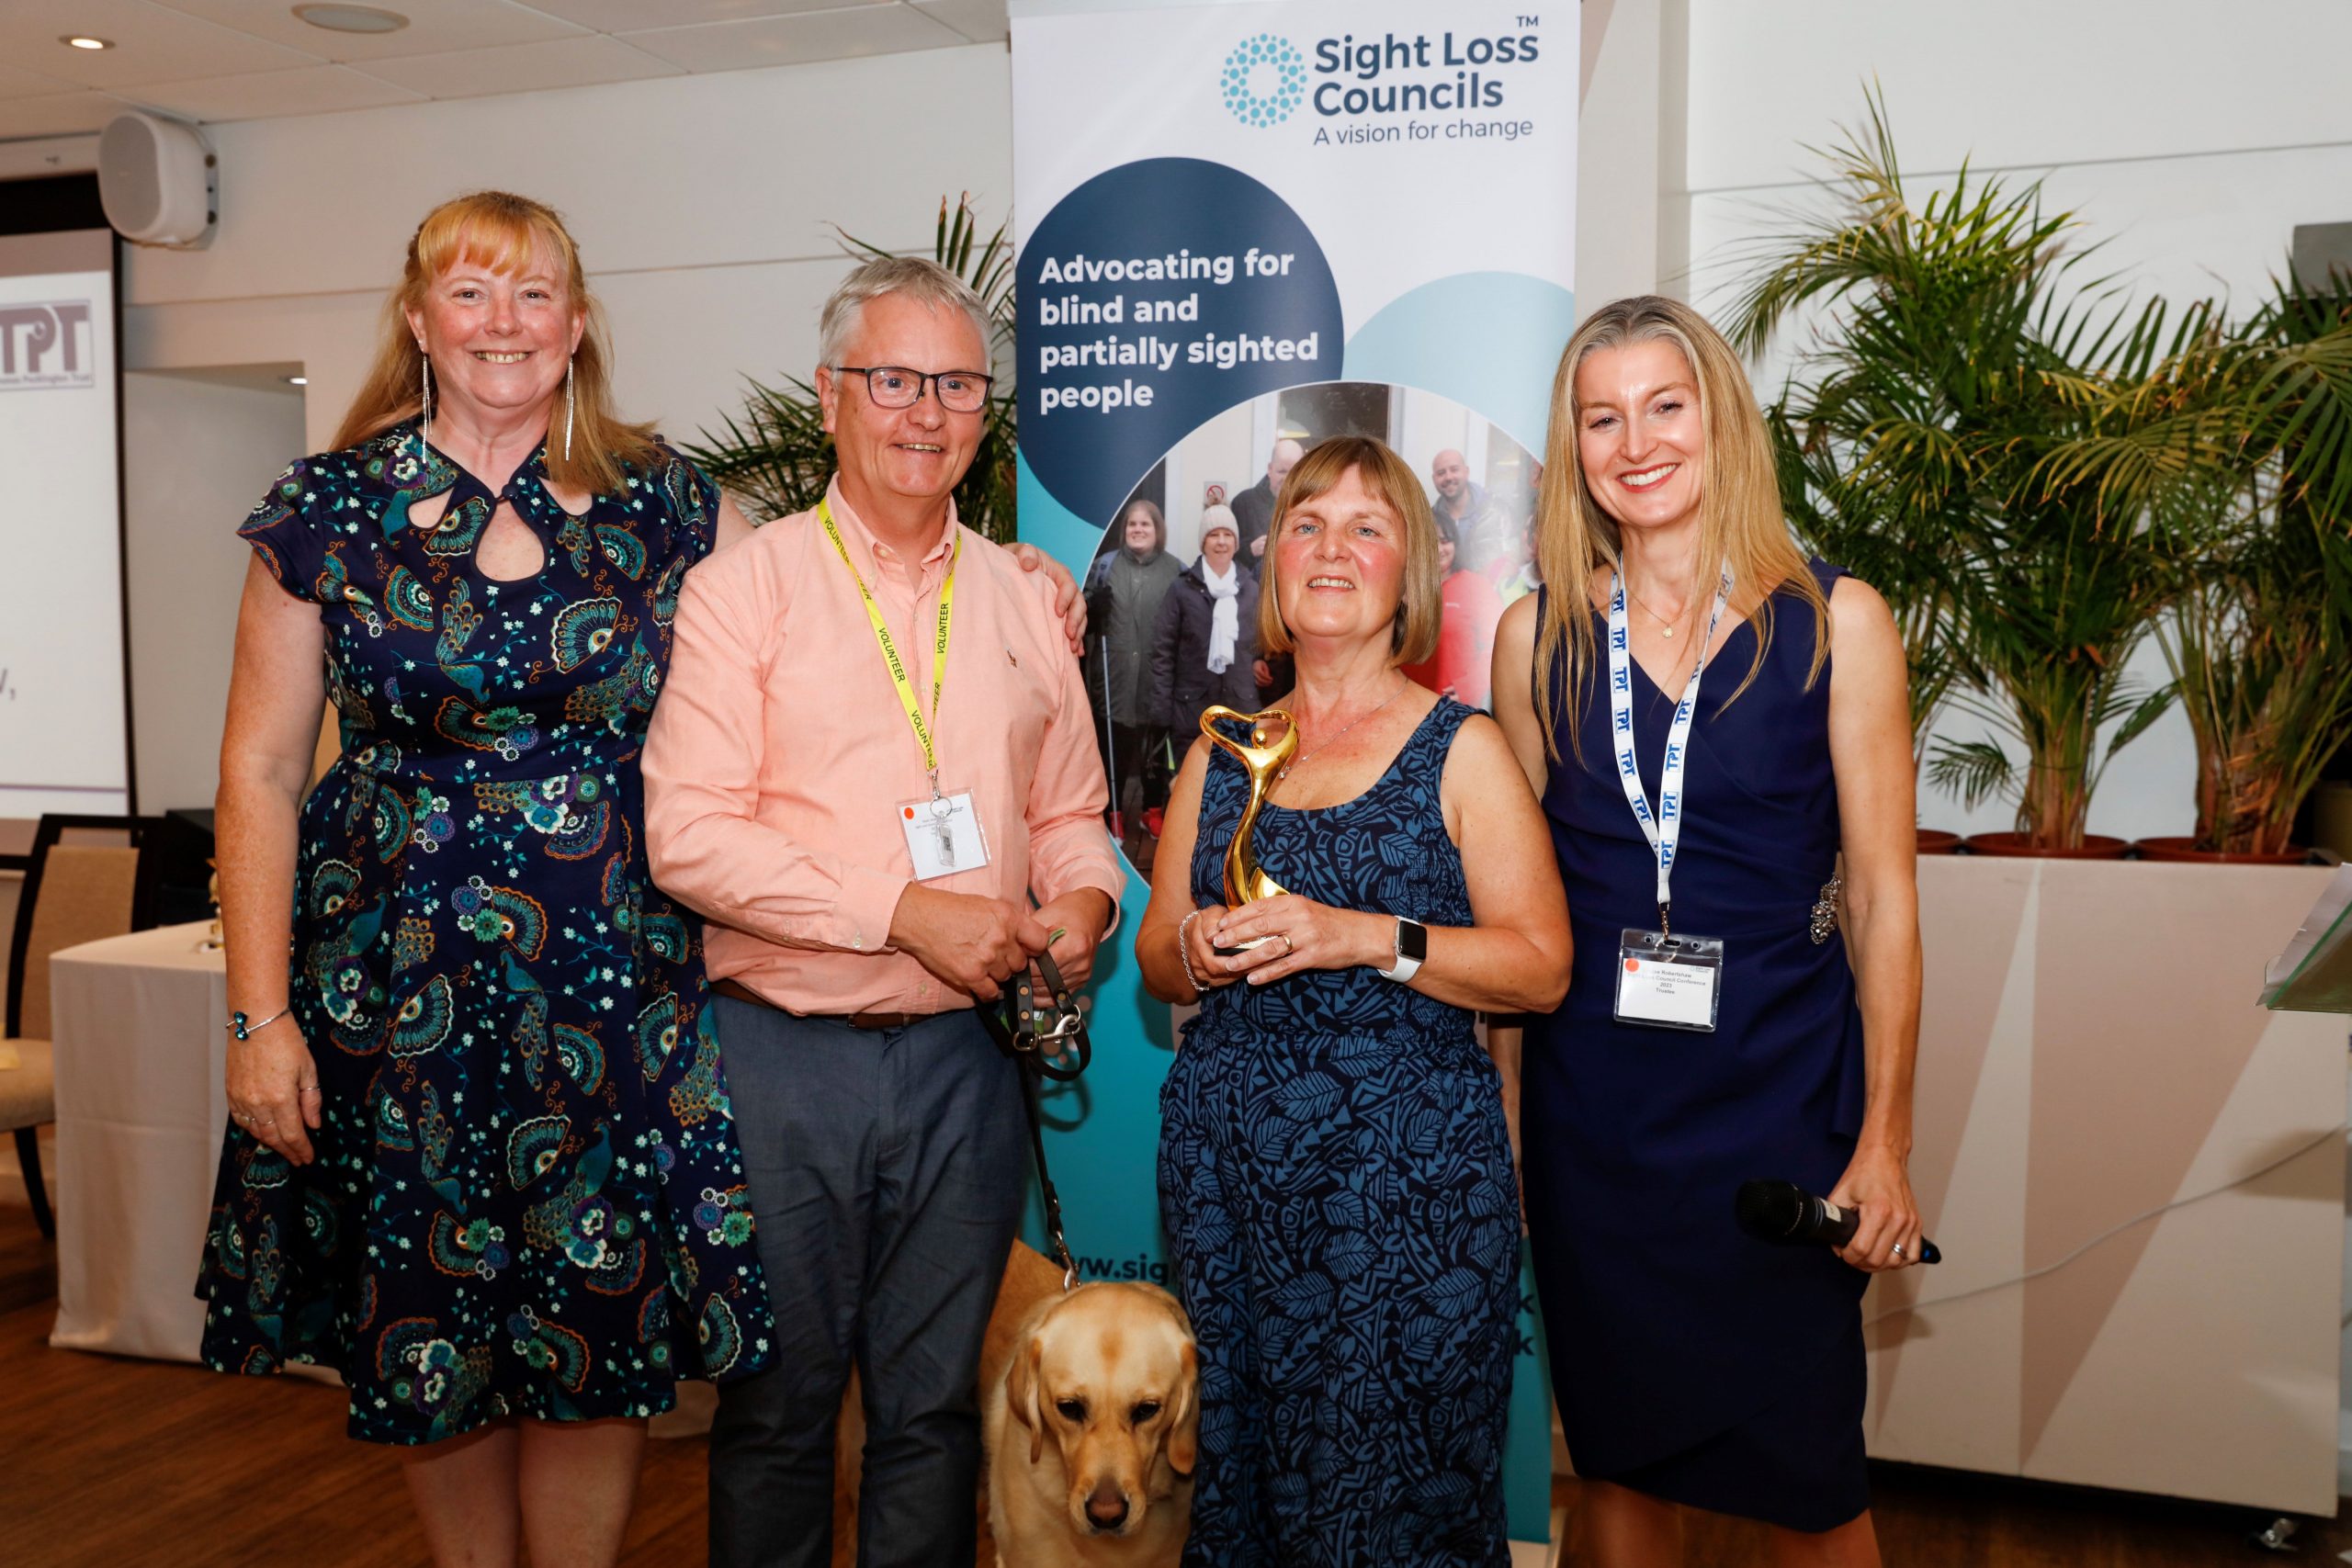 From left to right: Tricia Sail, Stuart & Julie Stephens Gloucestershire SLC, guide dog Heidi, and Louise Robertshaw, Trustee at TPT. Julie is holding her award for individual of the year.